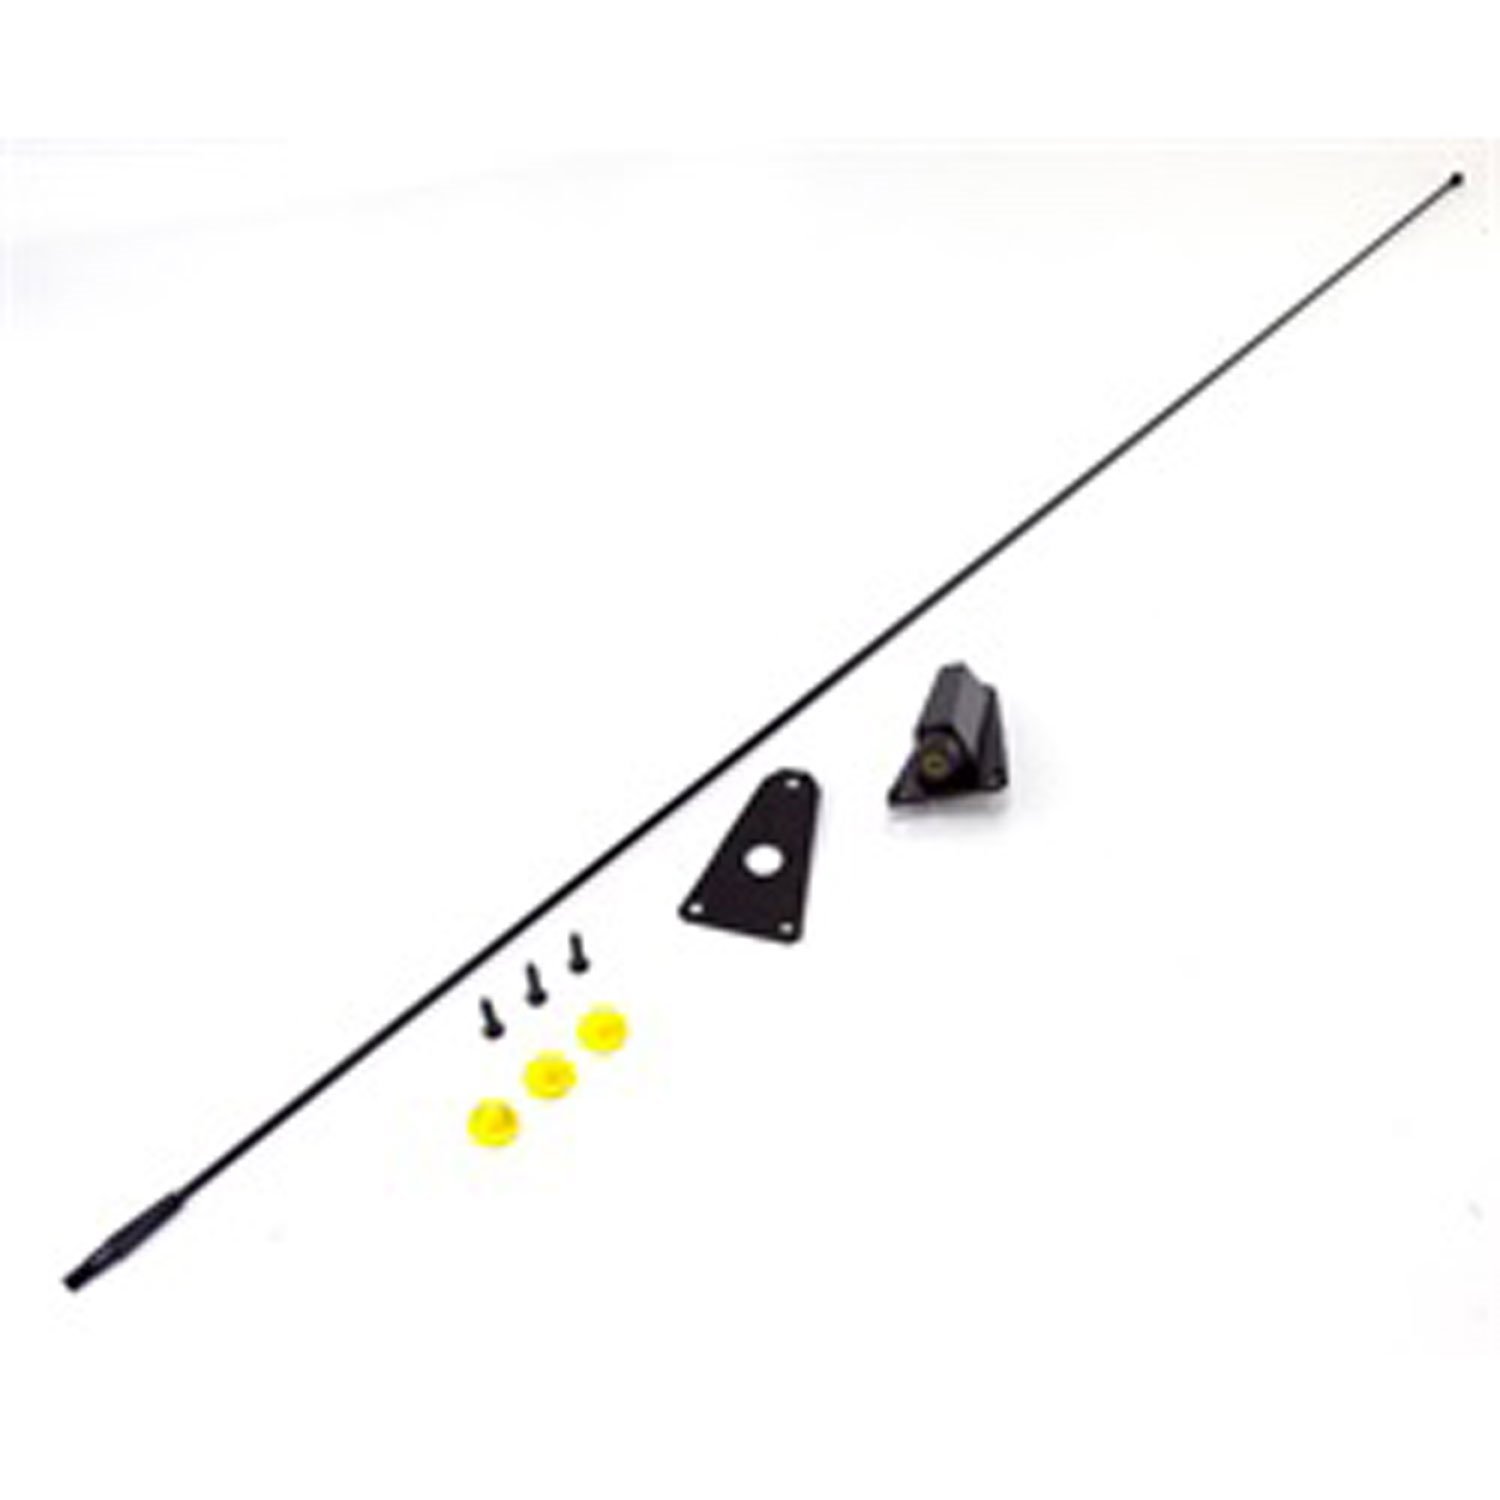 Black replacement antenna kit from Omix-ADA, Fits 76-86 Jeep CJ and 87-95 Wrangler YJ